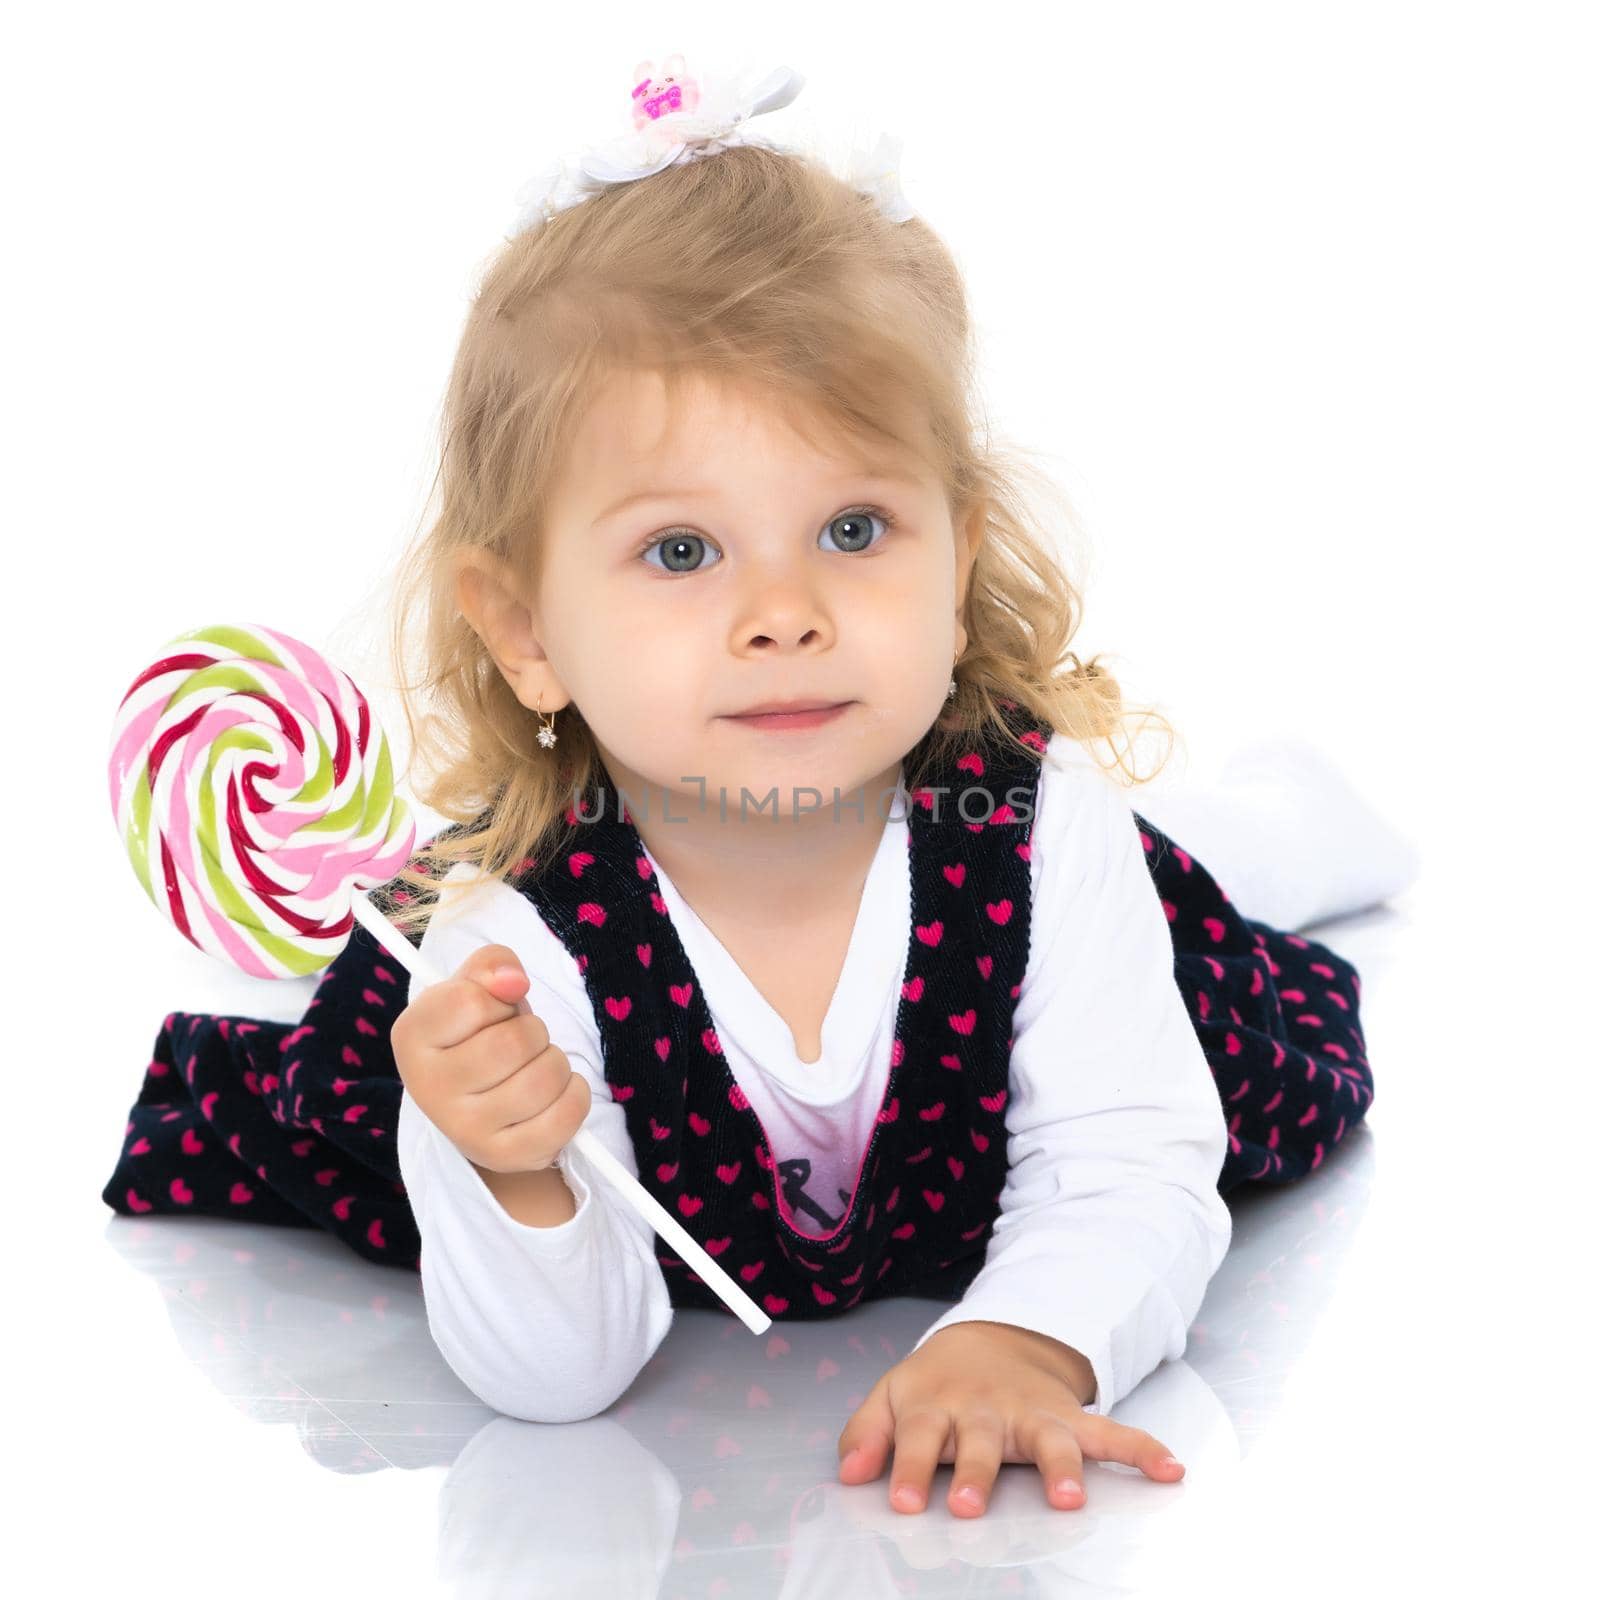 A little girl licks a candy on a stick. The concept of a happy childhood, proper nutrition. Isolated on white background.